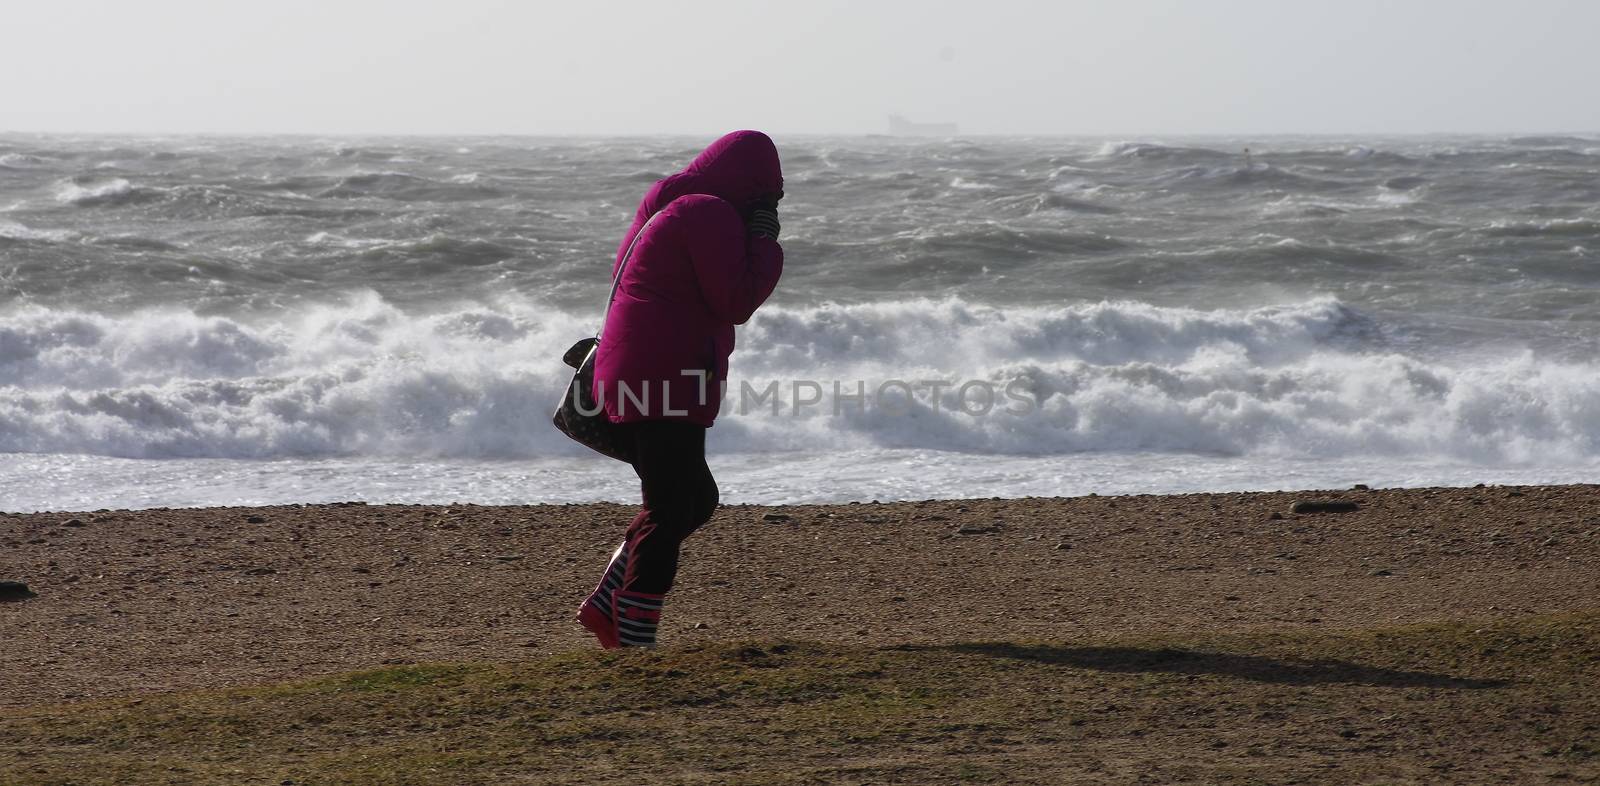 UK, Dorset: A woman faces into Storm Imogen's brutally high winds as waves crash on the south coastal beaches at Dorset, UK on February 8, 2016. With the UK on amber alert, gale-force winds and heavy rainfall have caused disruption to local train and ferry services. A 64-year-old inspector from the Royal Society for the Prevention of Cruelty to Animals reportedly went missing Sunday.